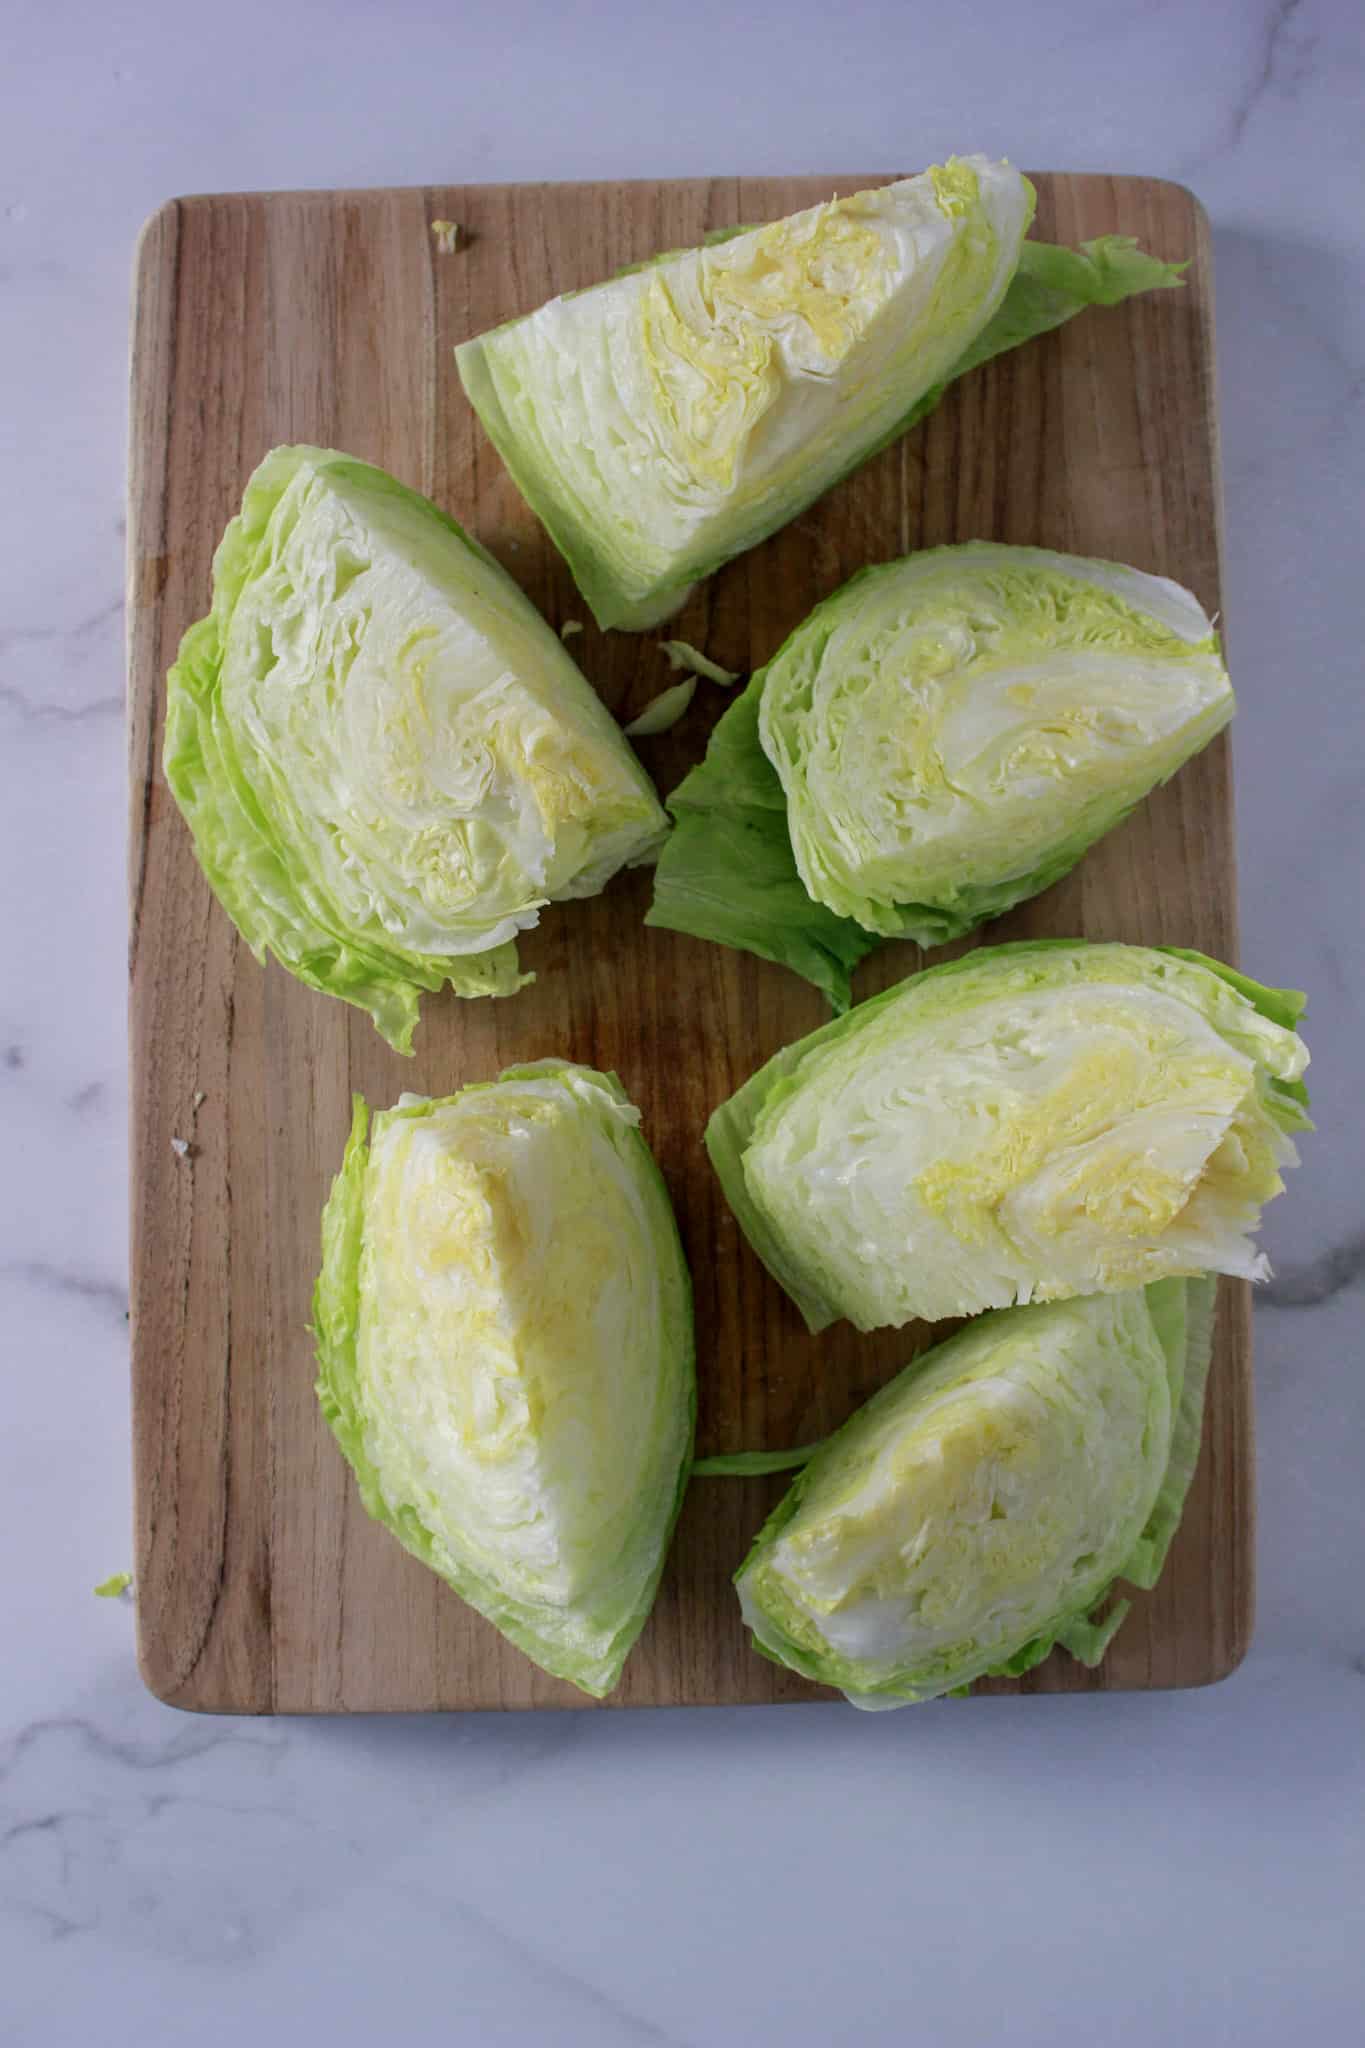 Three pictures of iceberg lettuce being cut for a wedge salad.